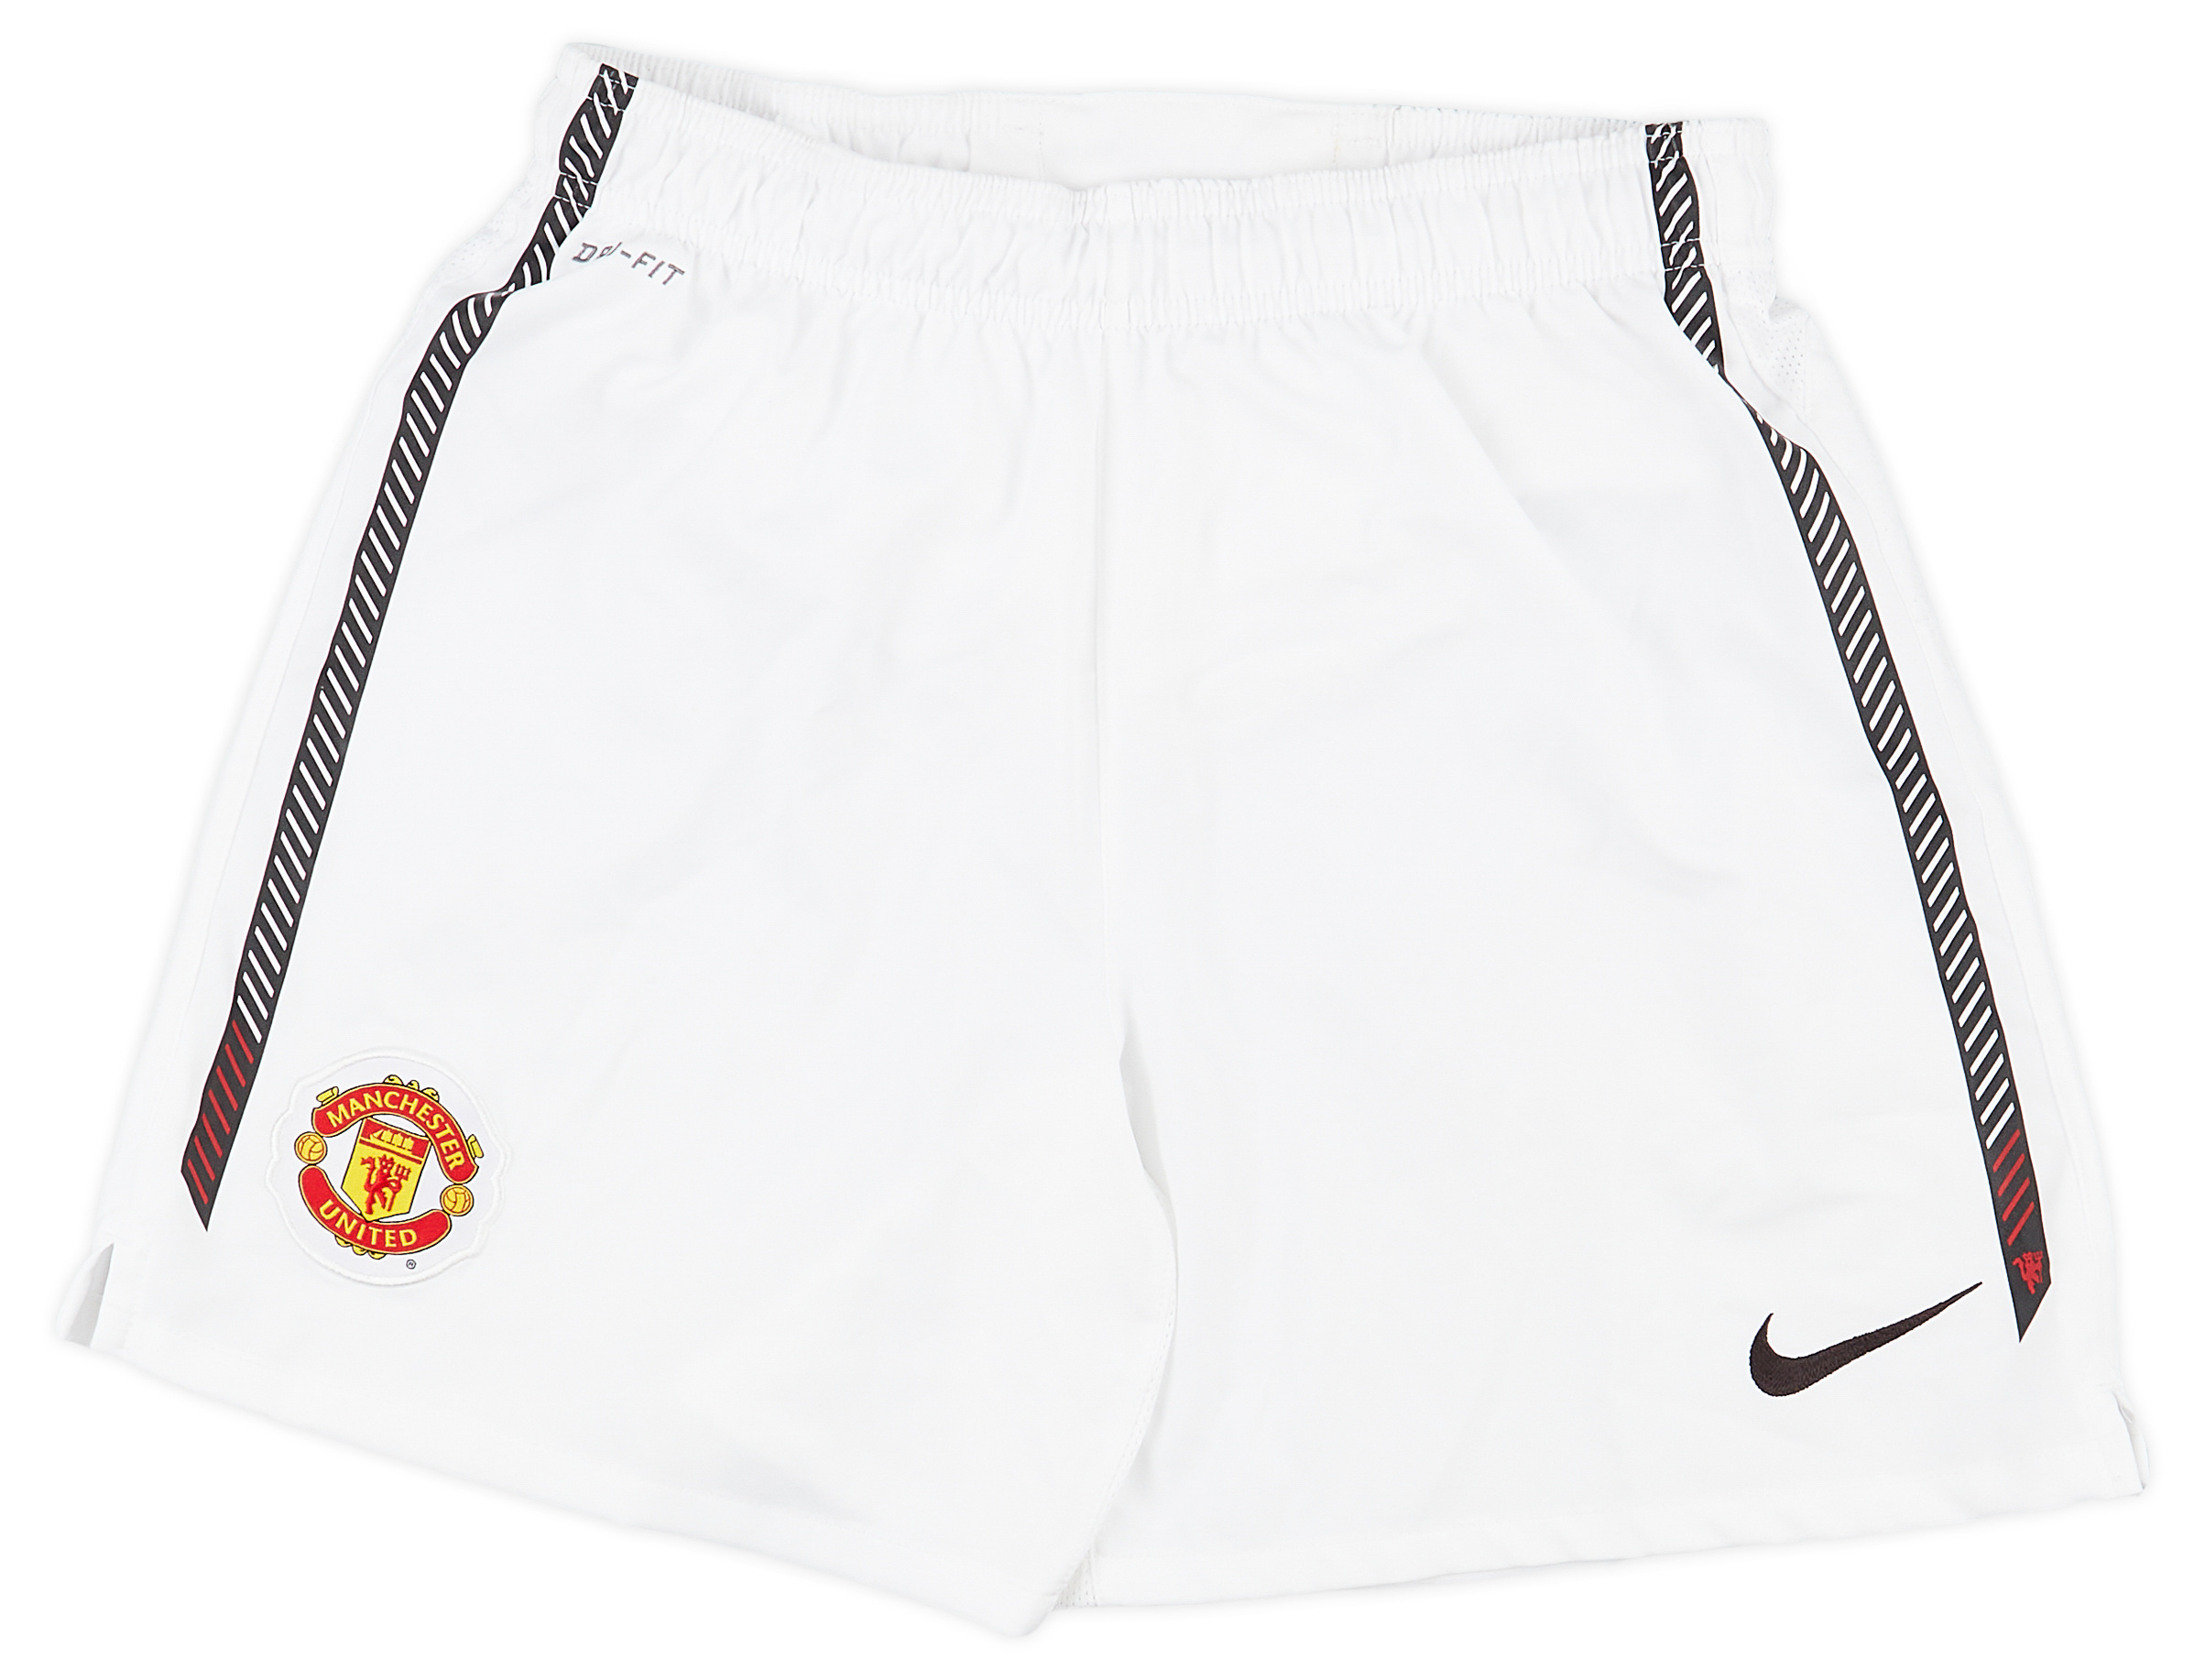 2010-11 Manchester United Home Shorts - Excellent 9/10 - (M.Boys)